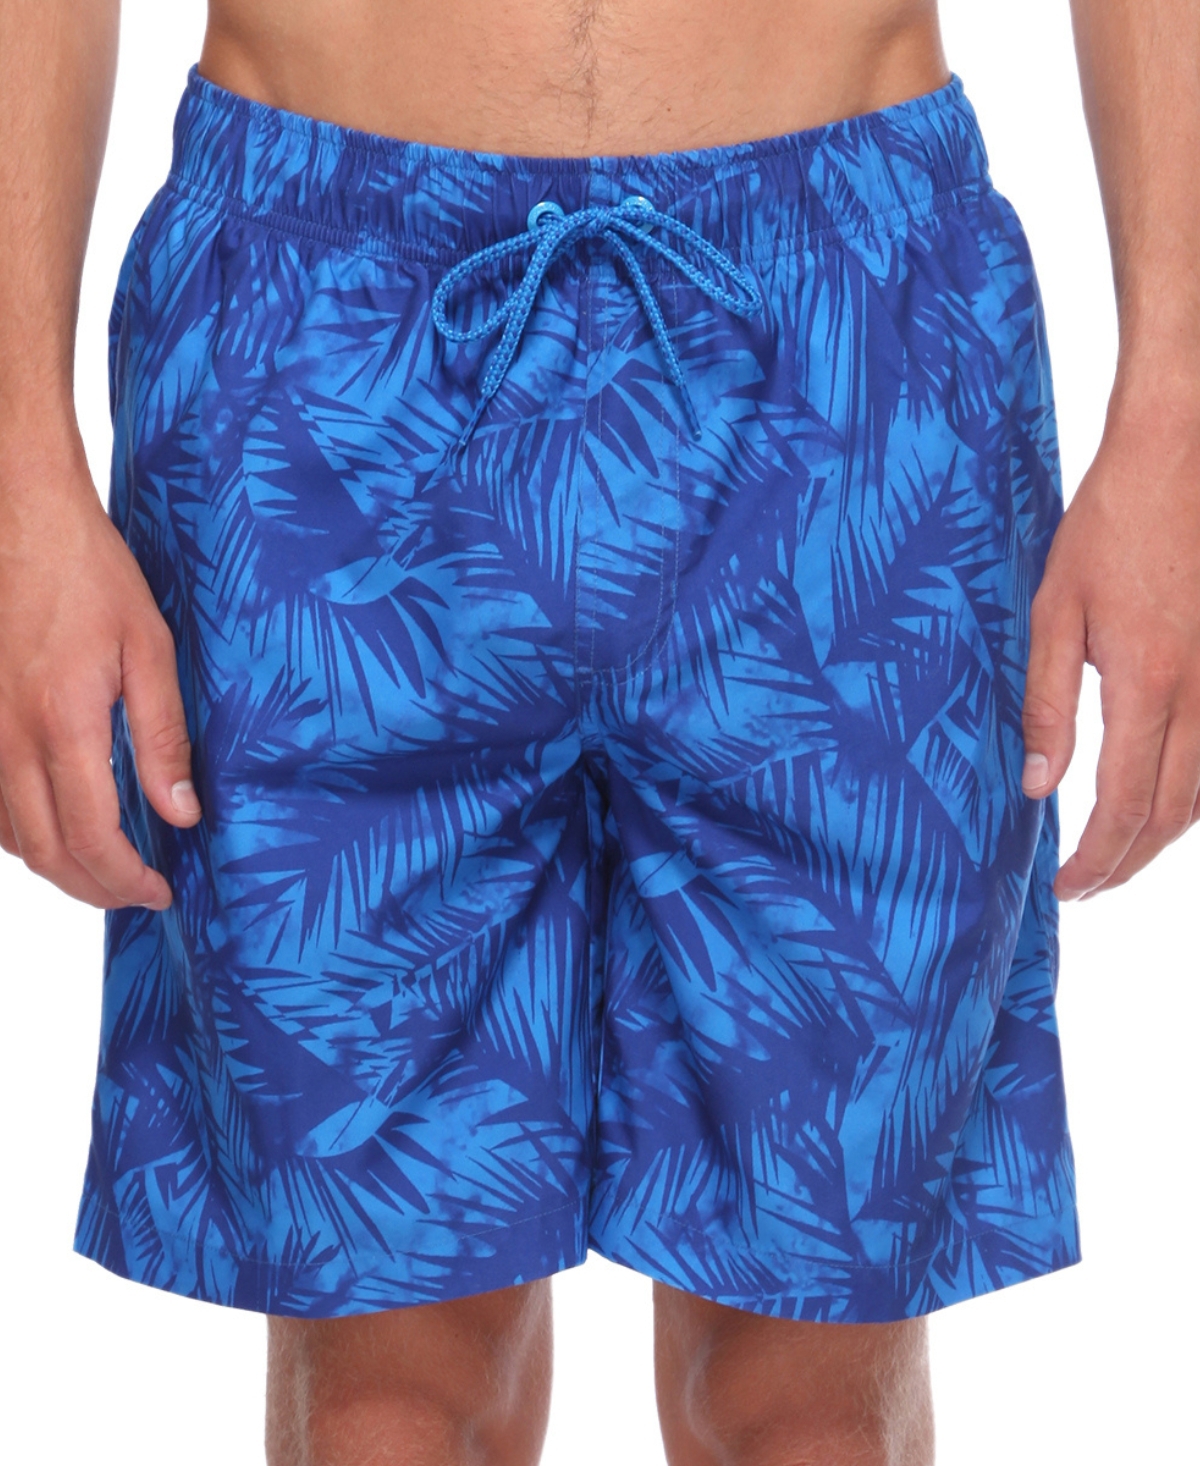 Men's 8" Mesh Lined Swim Trunks, up to Size 2XL - Stripes printed